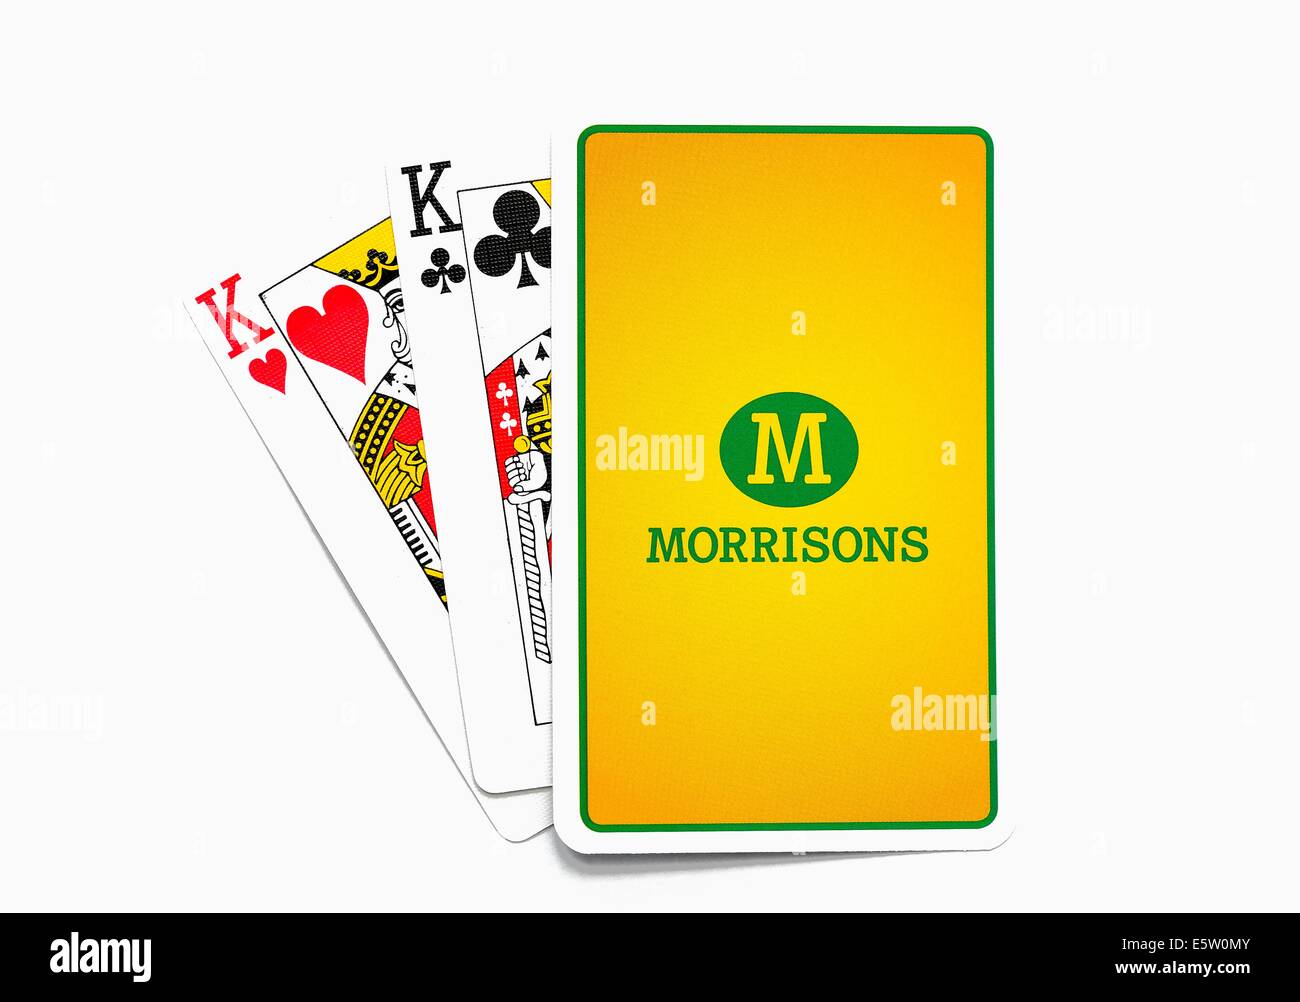 Morrisons supermarket 2 kings playing cards Stock Photo